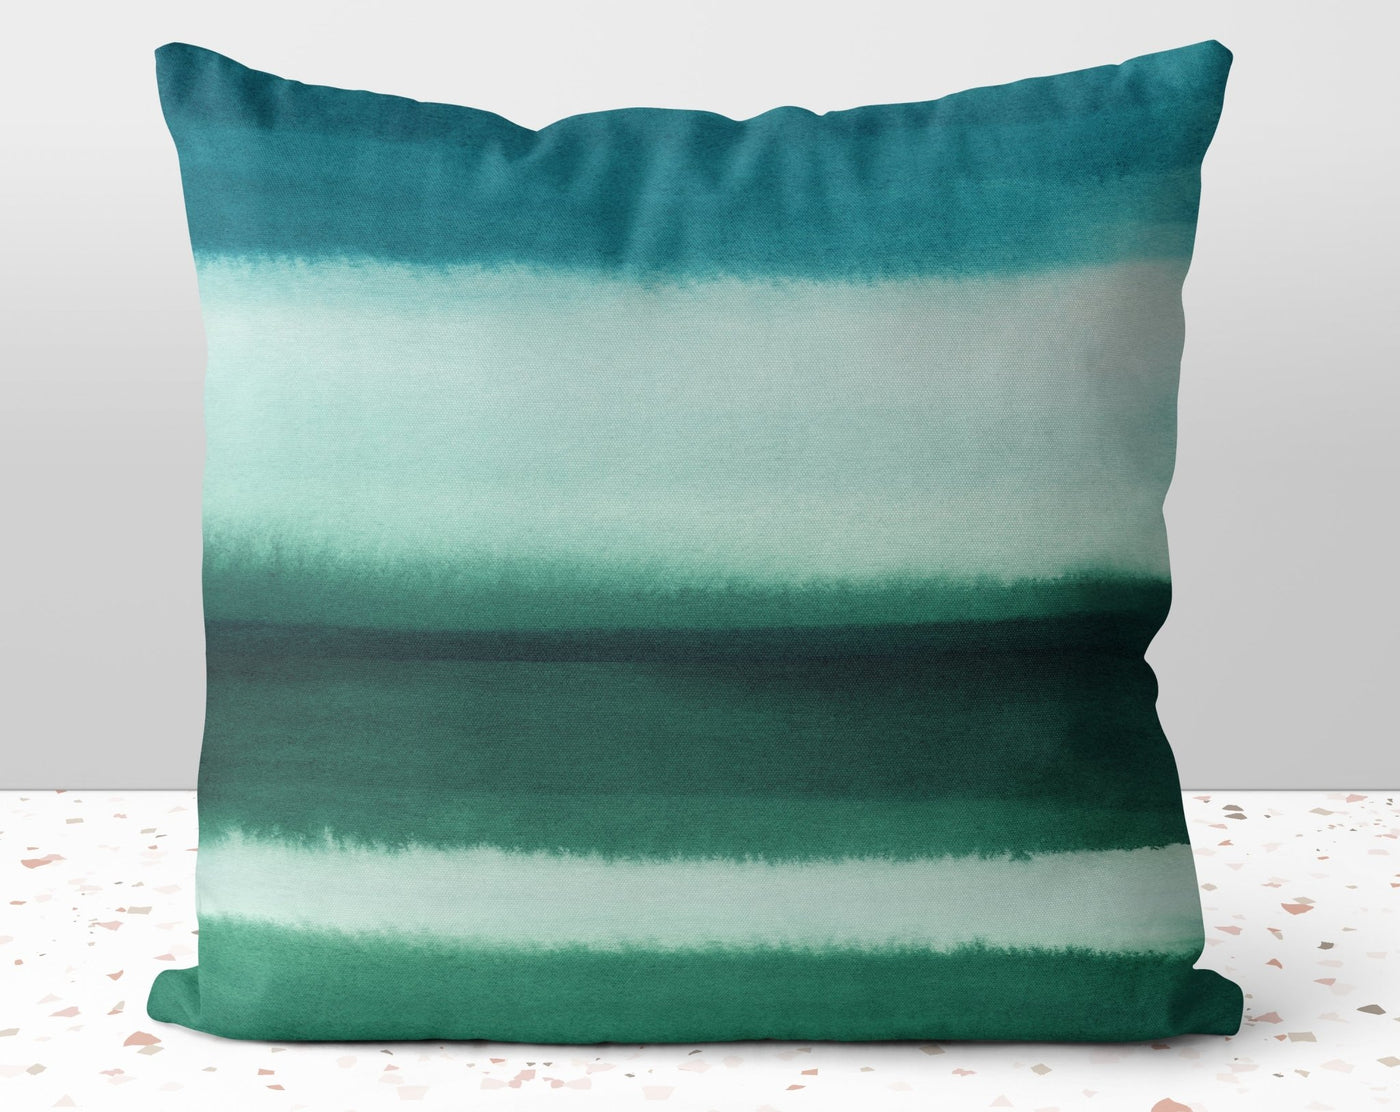 Abstract Green Ocean Landscape Stripes Square Pillow with Cover Throw with Insert - Cush Potato Pillows